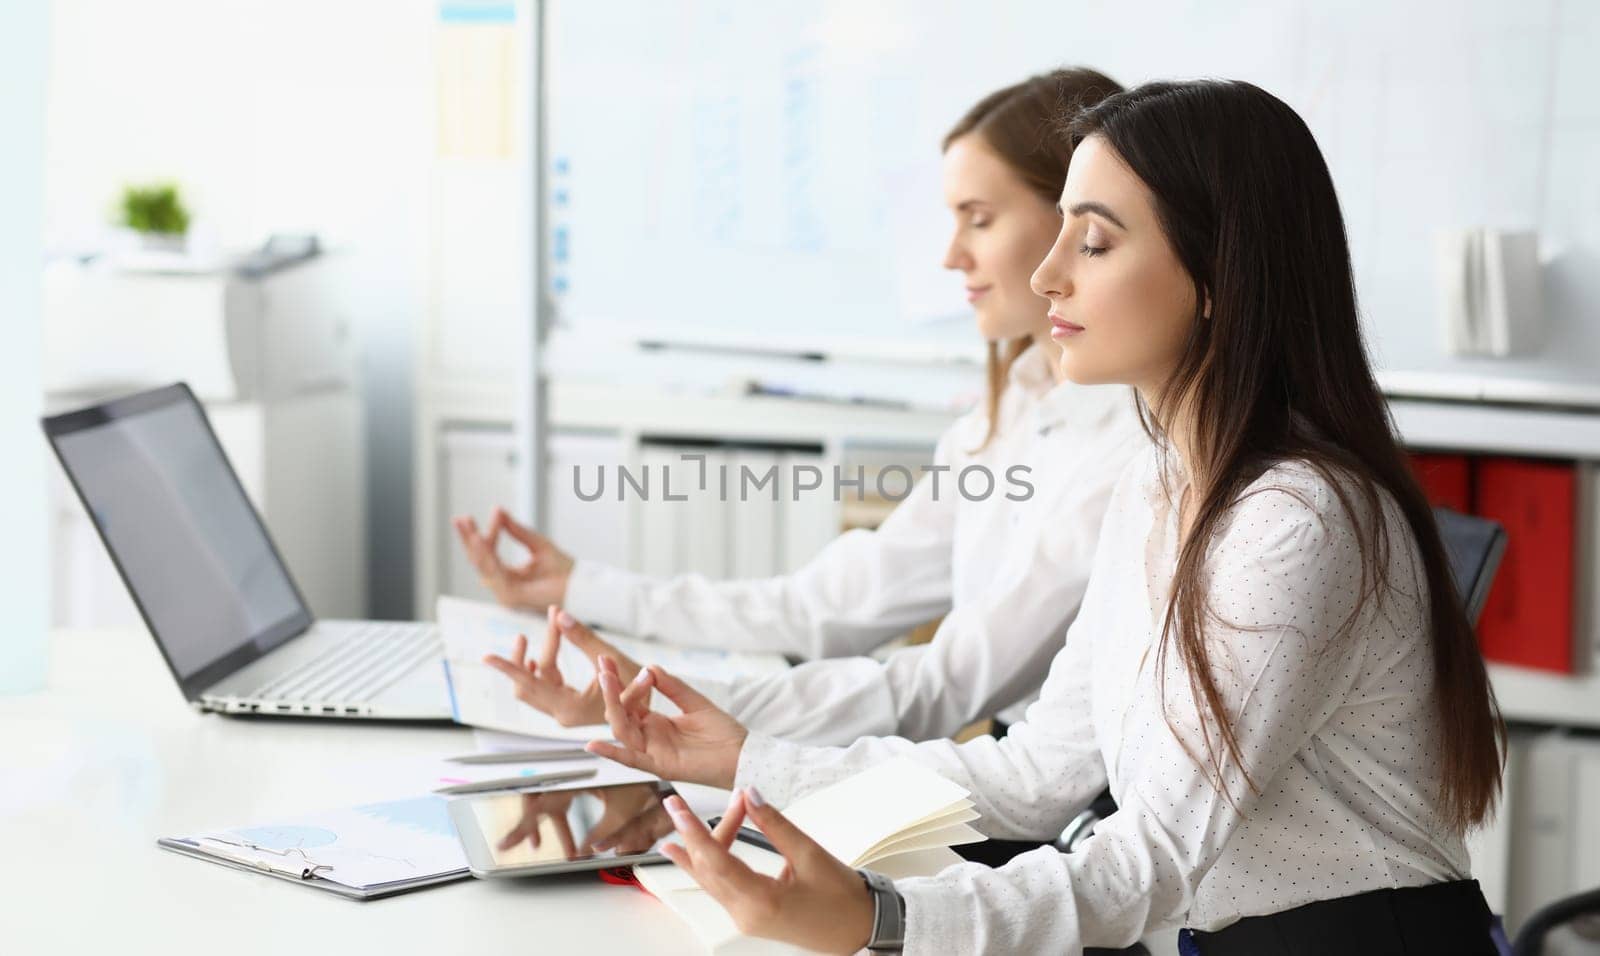 Portrait of gorgeous businesswoman closing tender eyes in calmness and satisfaction sitting at modern workplace. Beautiful woman doing special meditation pose. Friendly teamwork concept